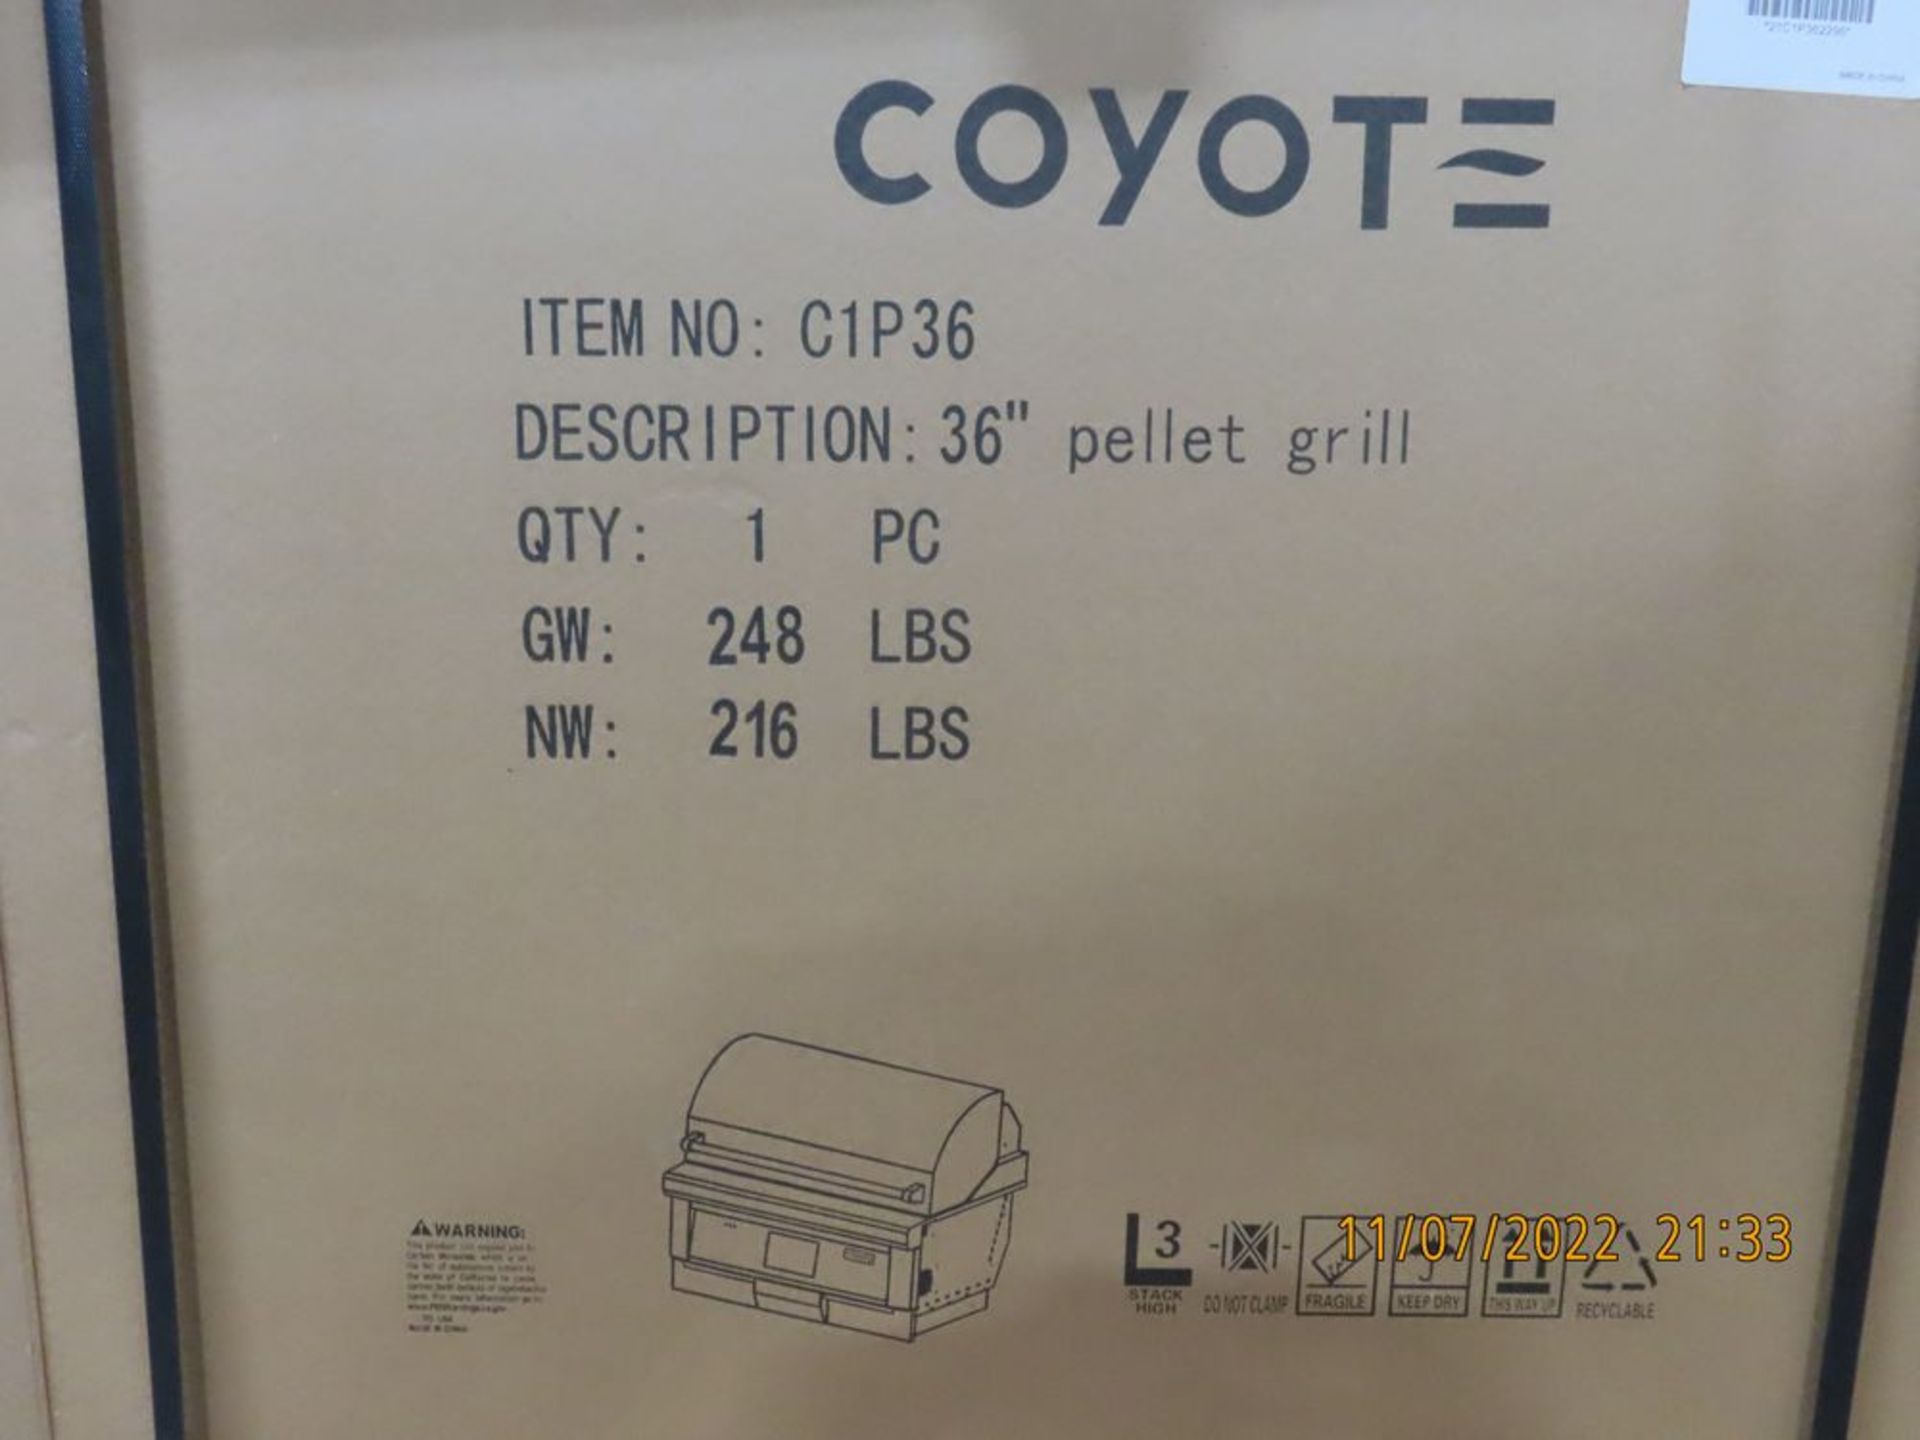 Coyote mod. C1P36, CO-36'' Pellet Grill - Image 3 of 5